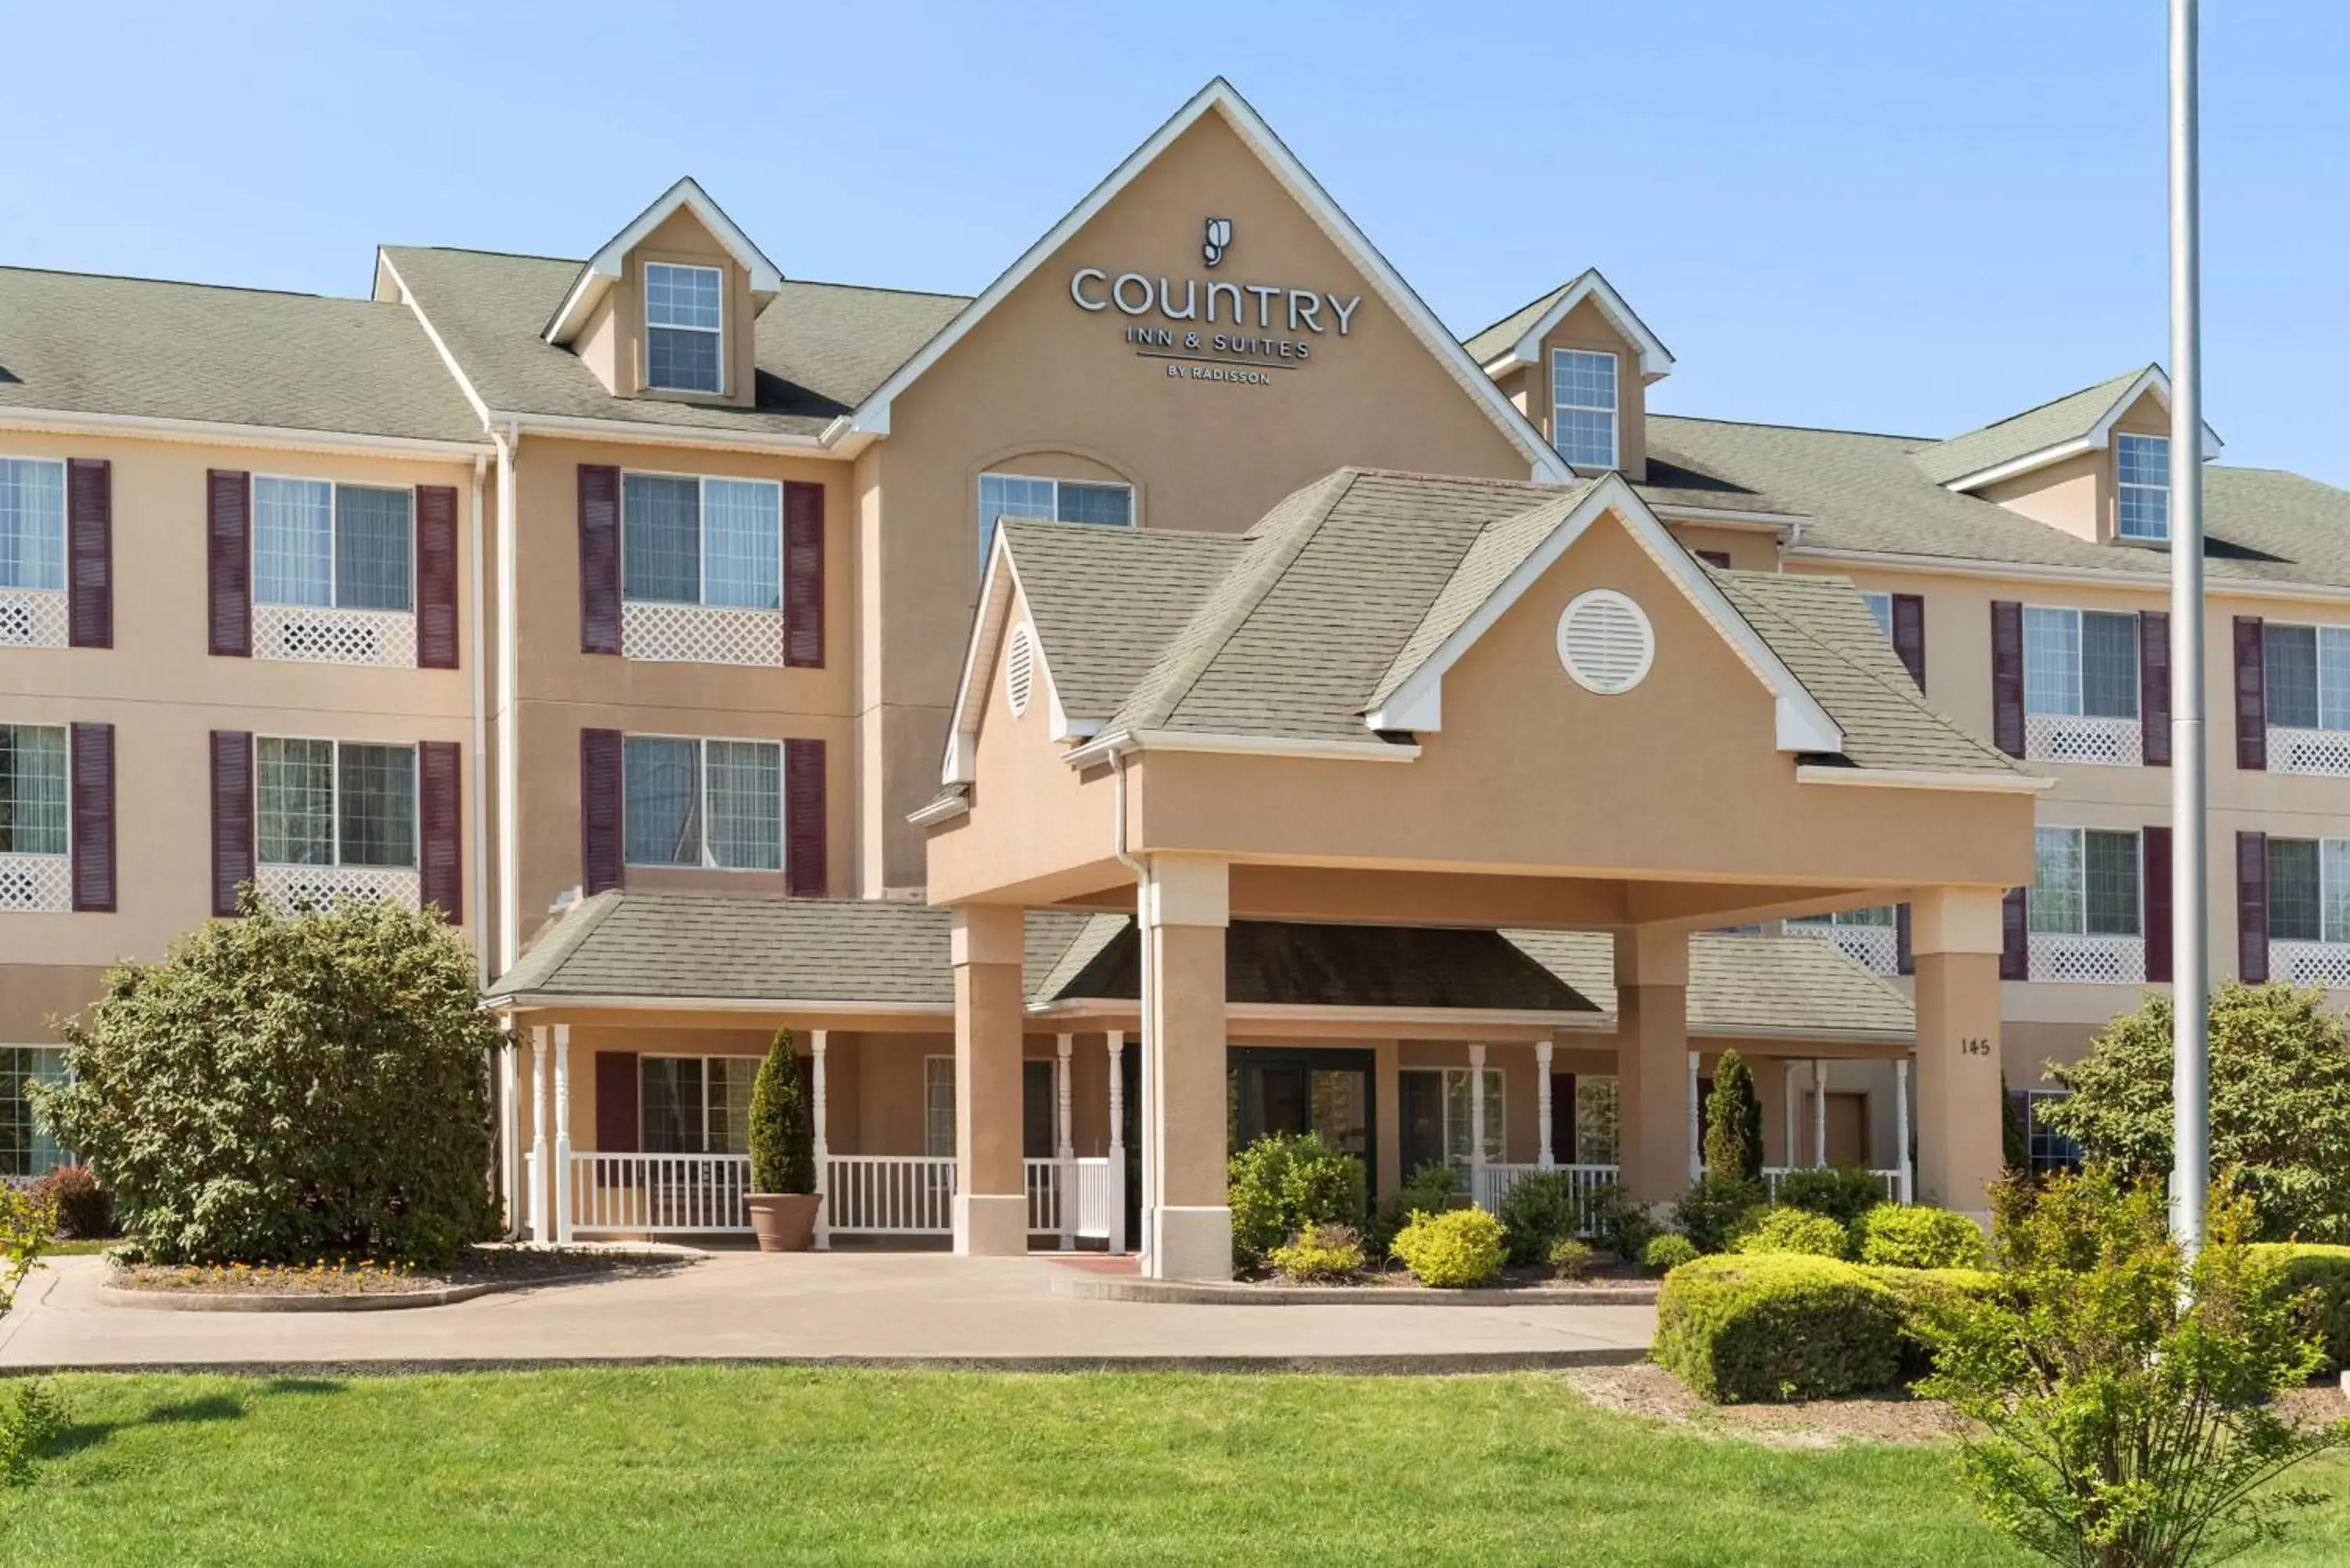 Property building in Country Inn & Suites by Radisson, Paducah, KY